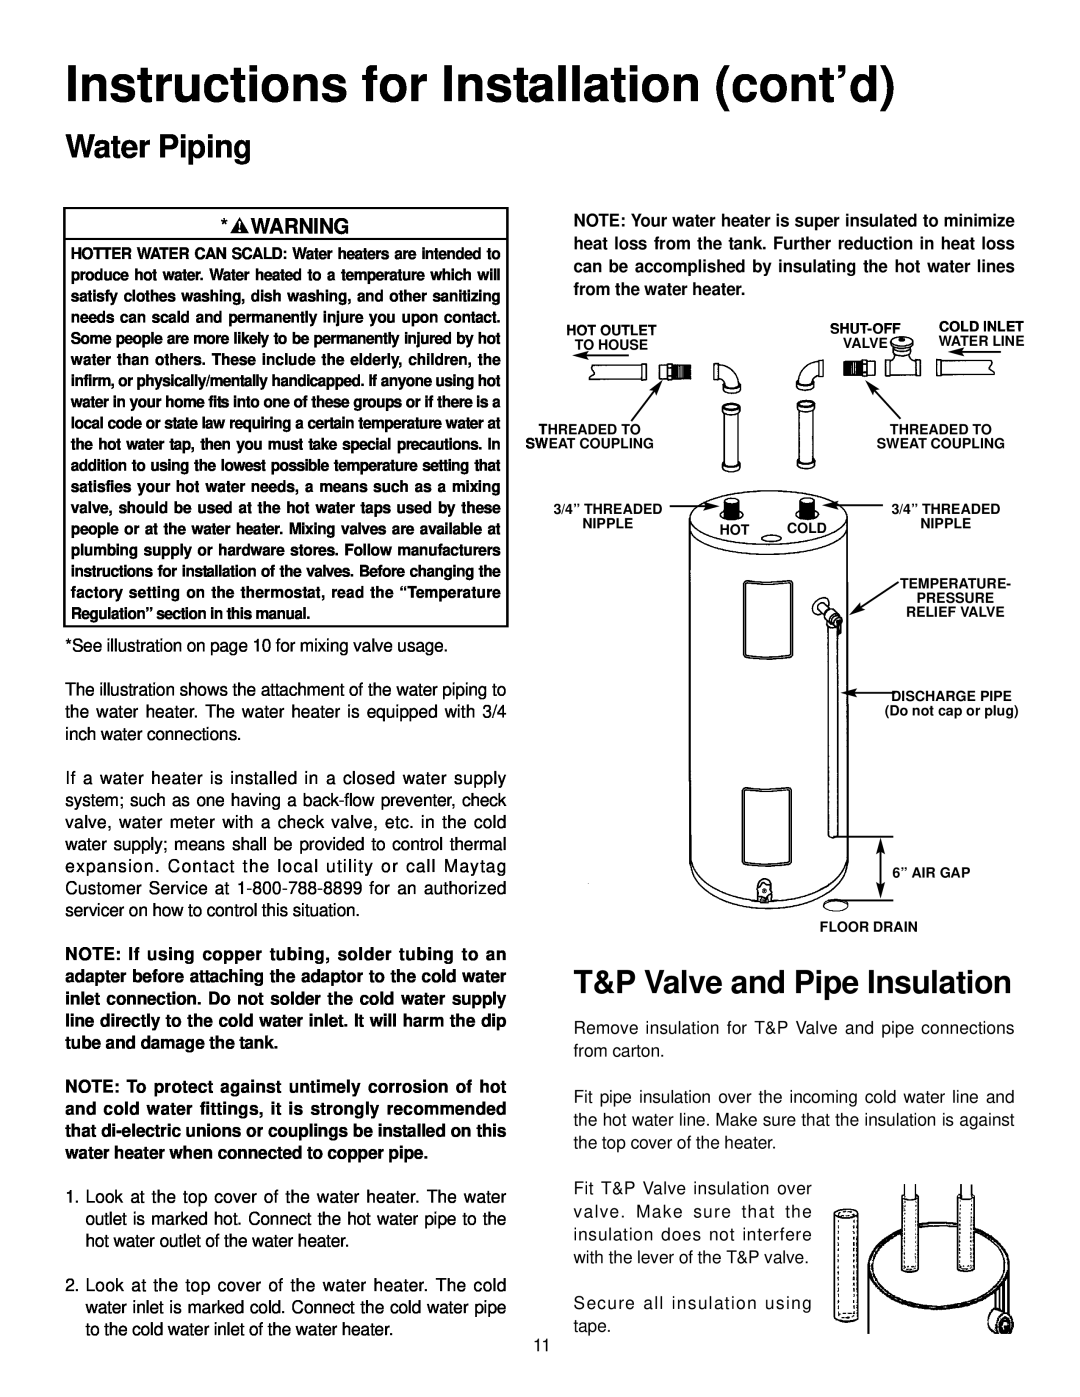 Maytag HR640DJRT, HR652SJRT, HR682SJRT Water Piping, T&P Valve and Pipe Insulation, Instructions for Installation cont’d 